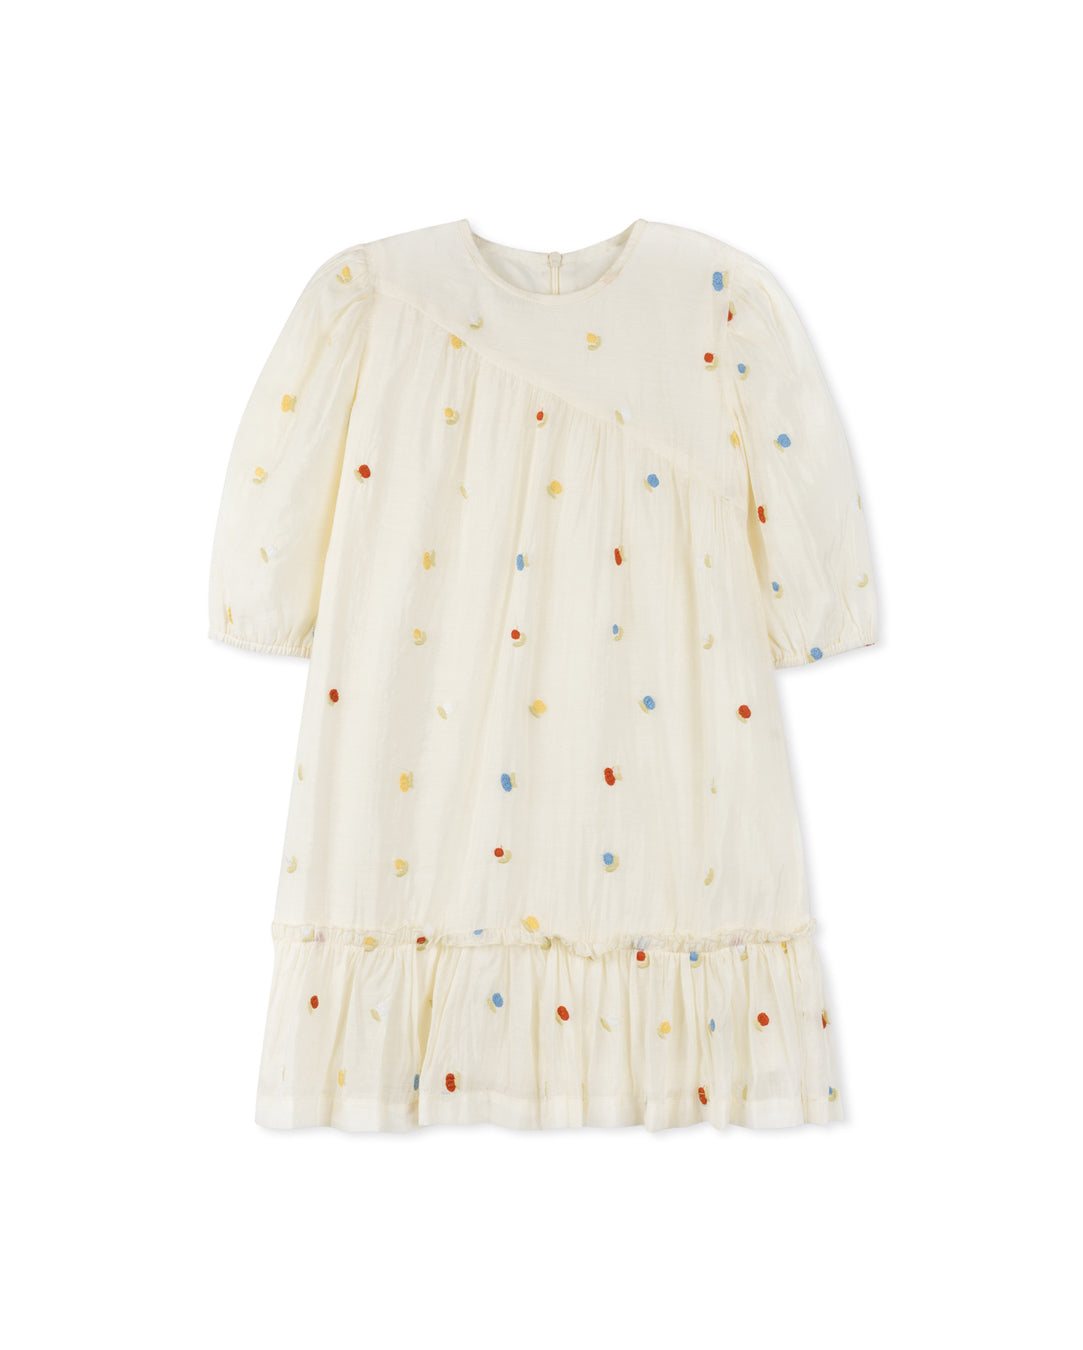 LILOU IVORY EMBROIDERED TIERED DRESS [FINAL SALE]